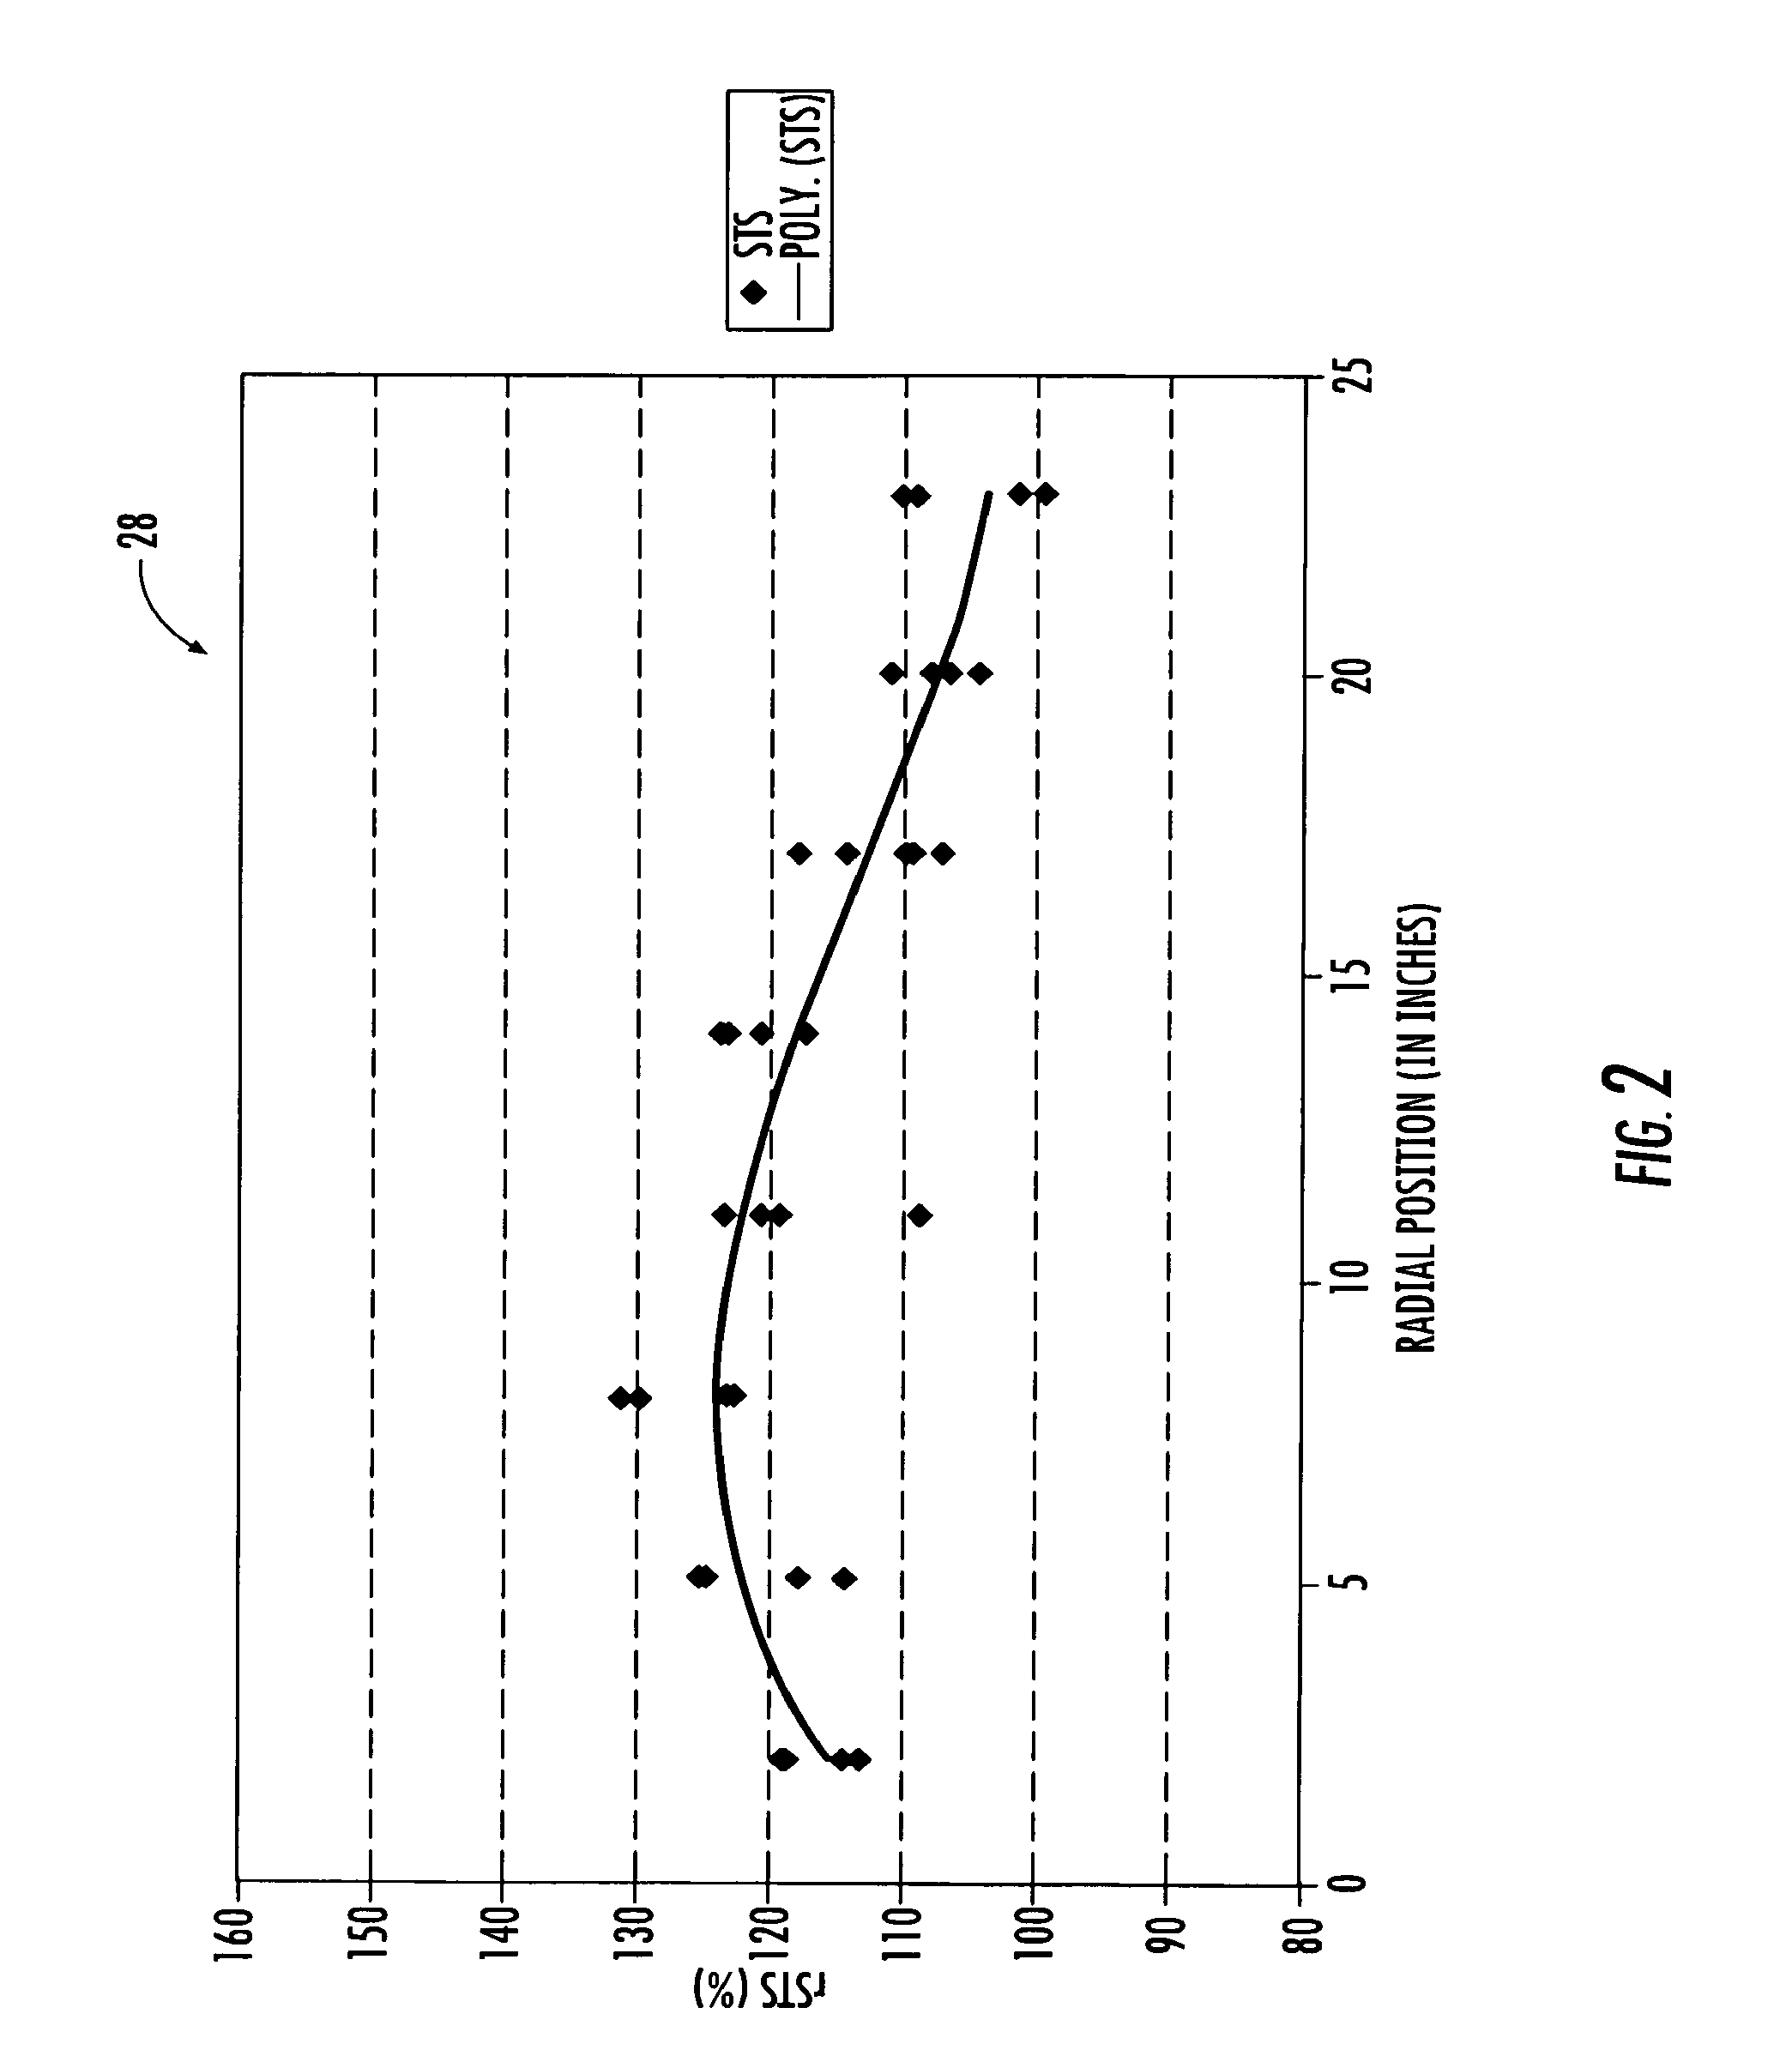 Through-roll profile unwind control system and method